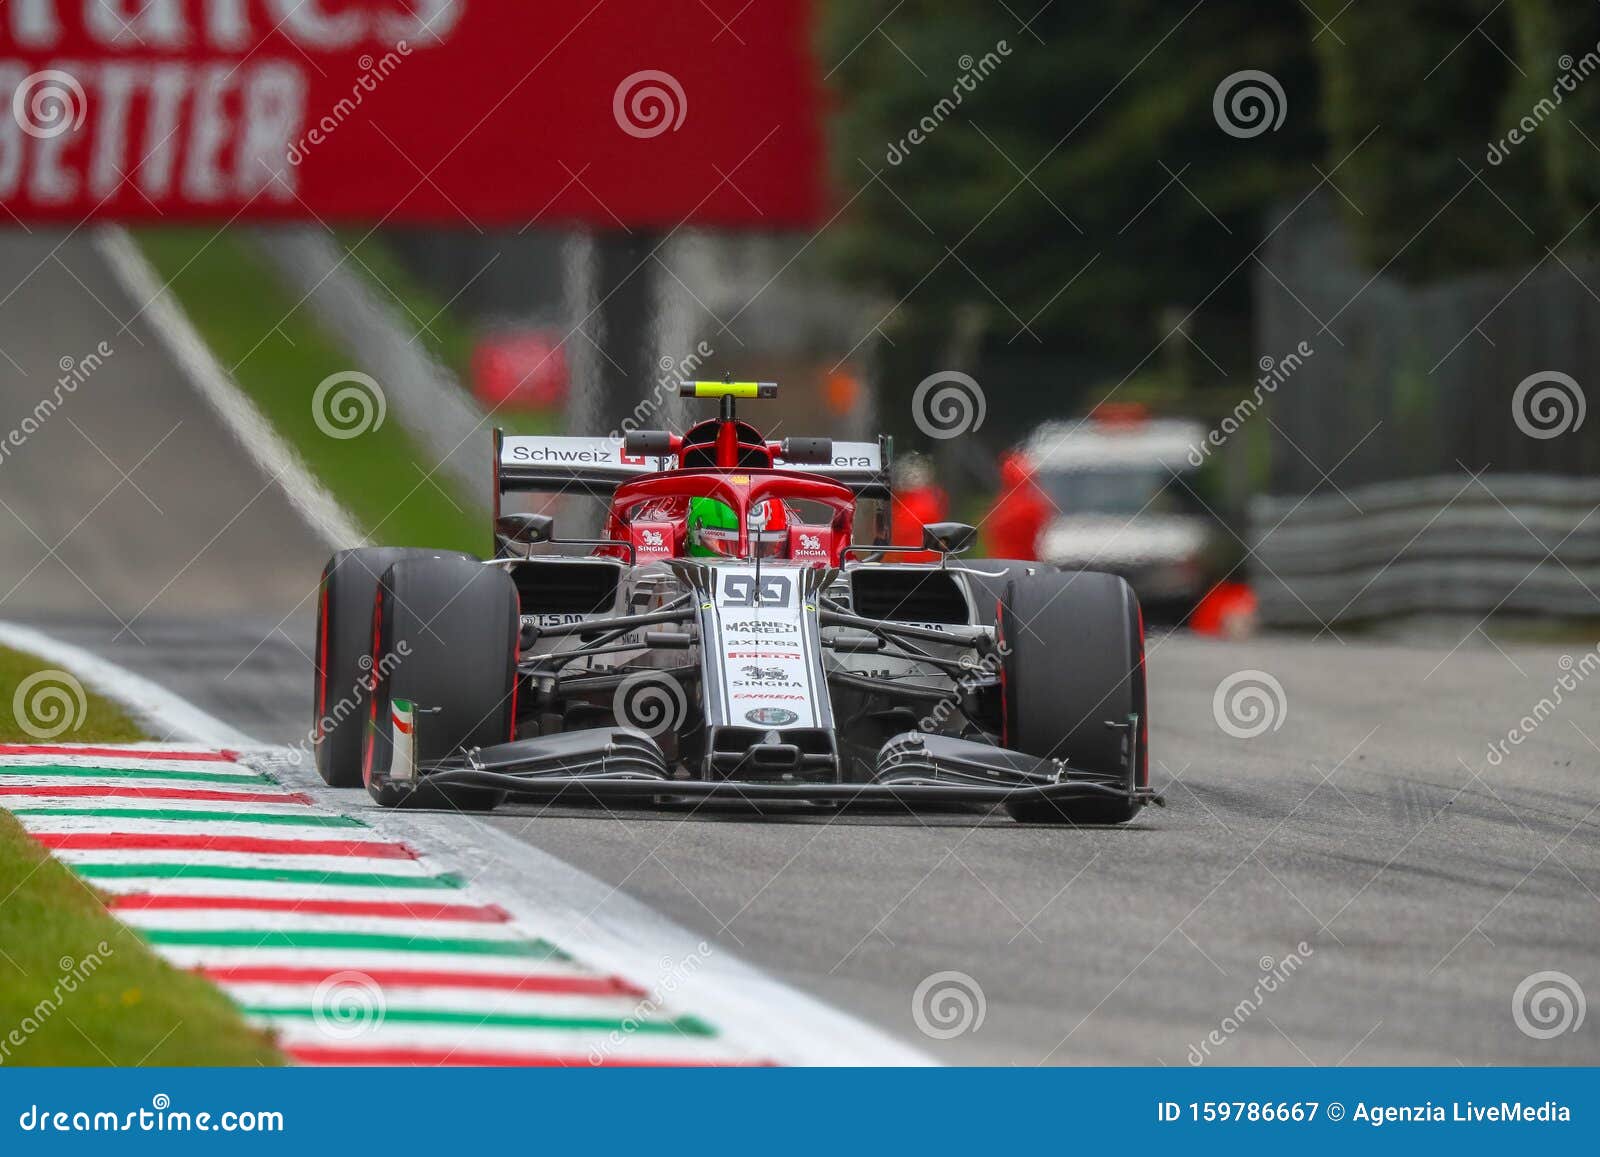 Formula 1 Championship Grand Prix Heineken of Italy 2019 - Friday - Free Practice 1 and 2 Editorial Photography